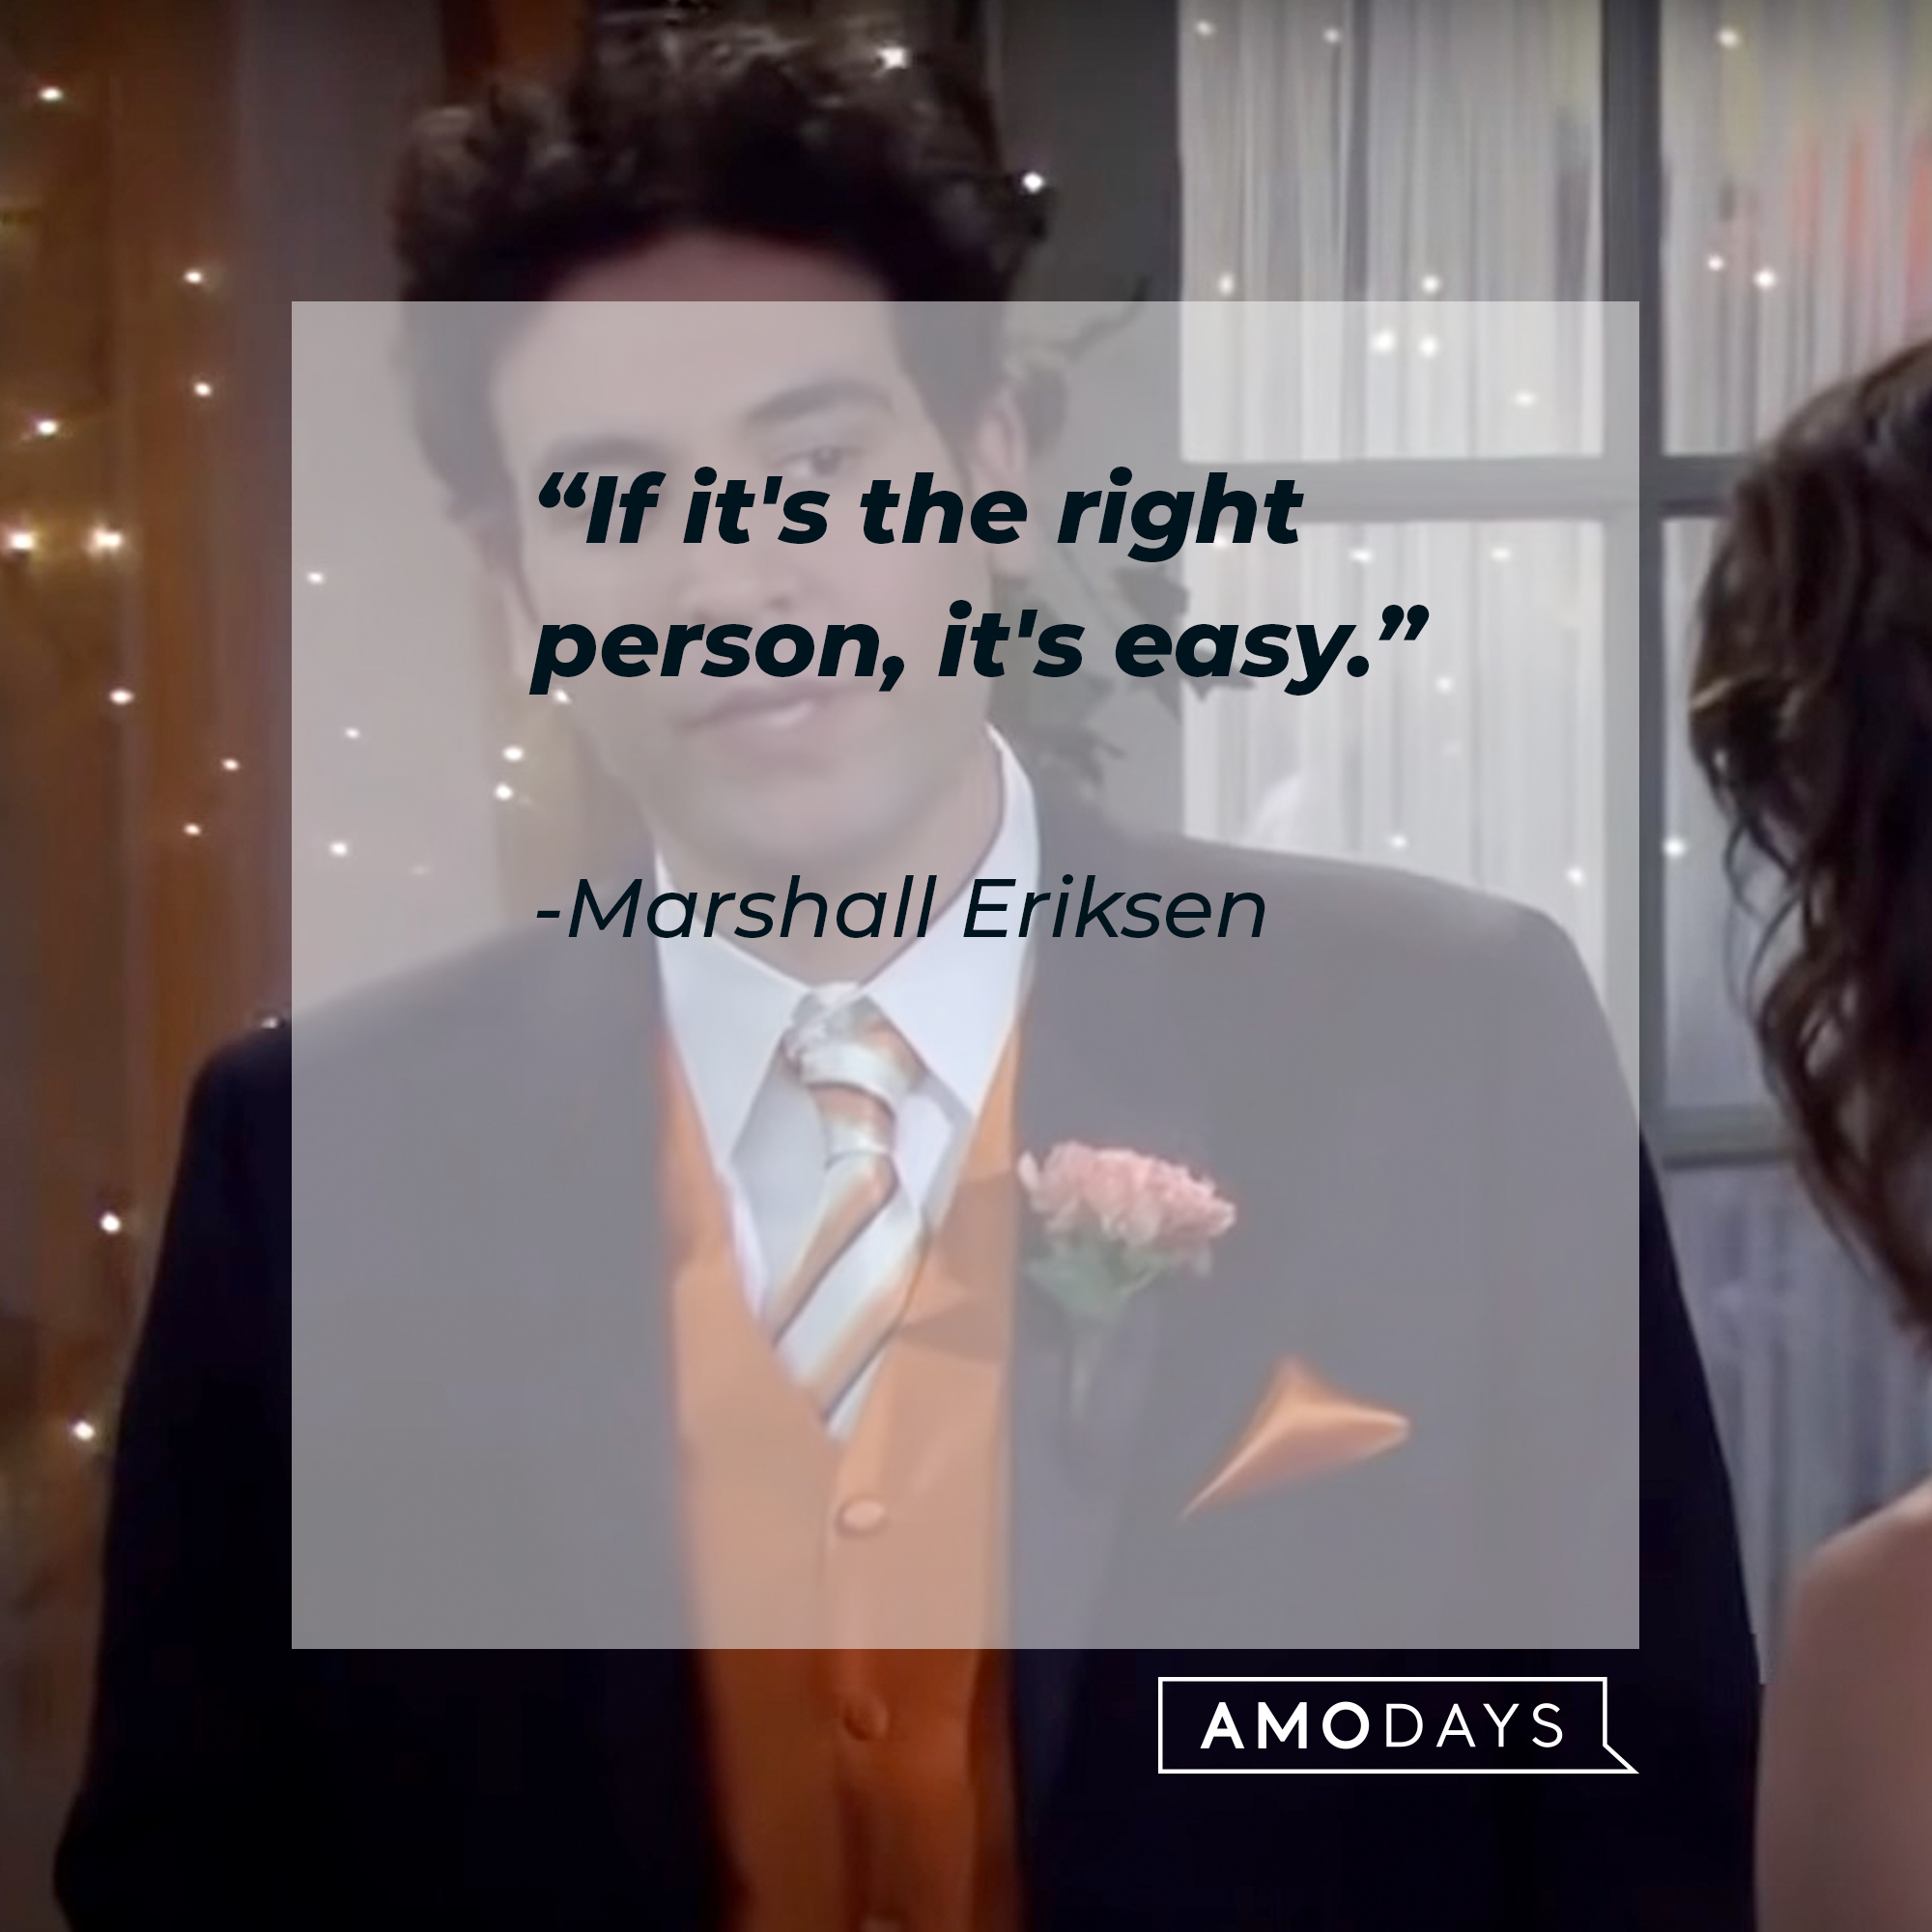 An image of Ted Mosby with  Marshall Eriksen’s quote: “If it's the right person, it's easy.” | Source: facebook.com/OfficialHowIMetYourMother